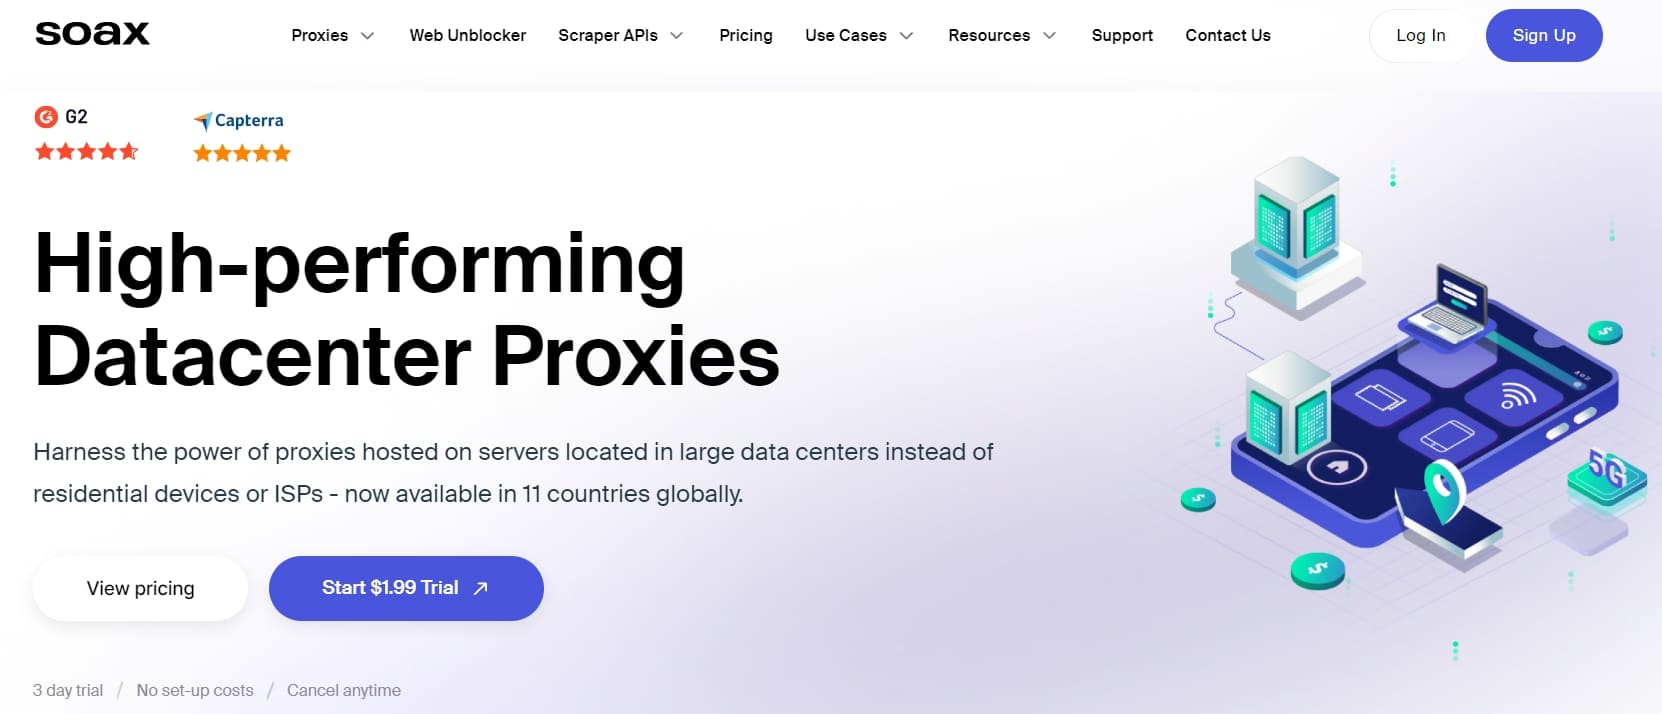 Soax Datacenter Proxies Homepage